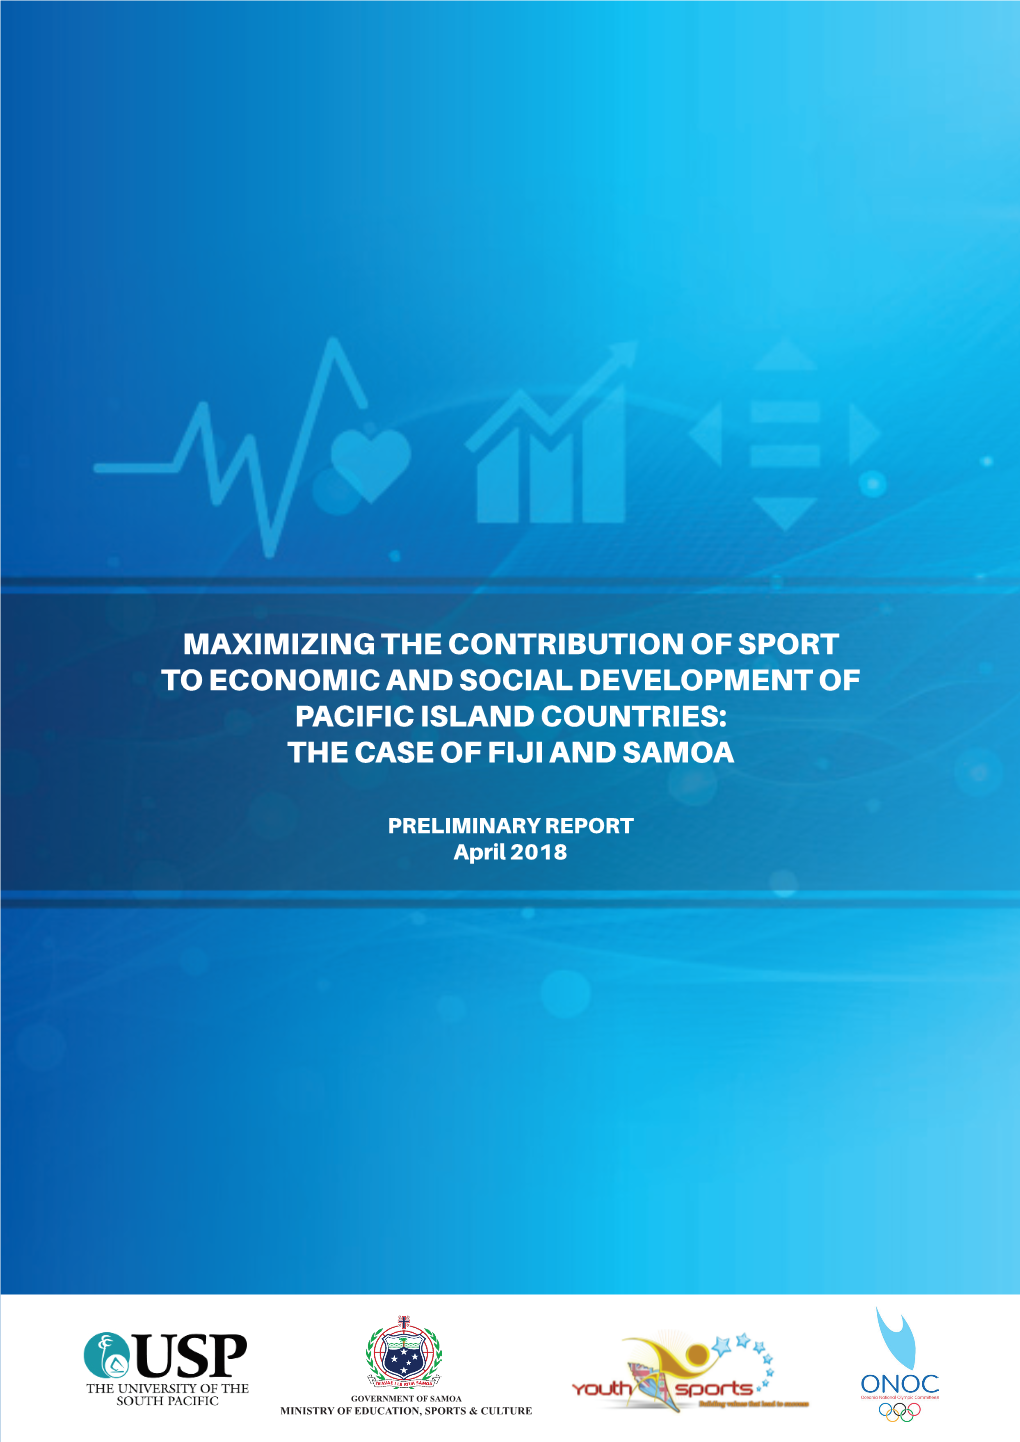 Maximizing the Contribution of Sport to Economic and Social Development of Pacific Island Countries: the Case of Fiji and Samoa